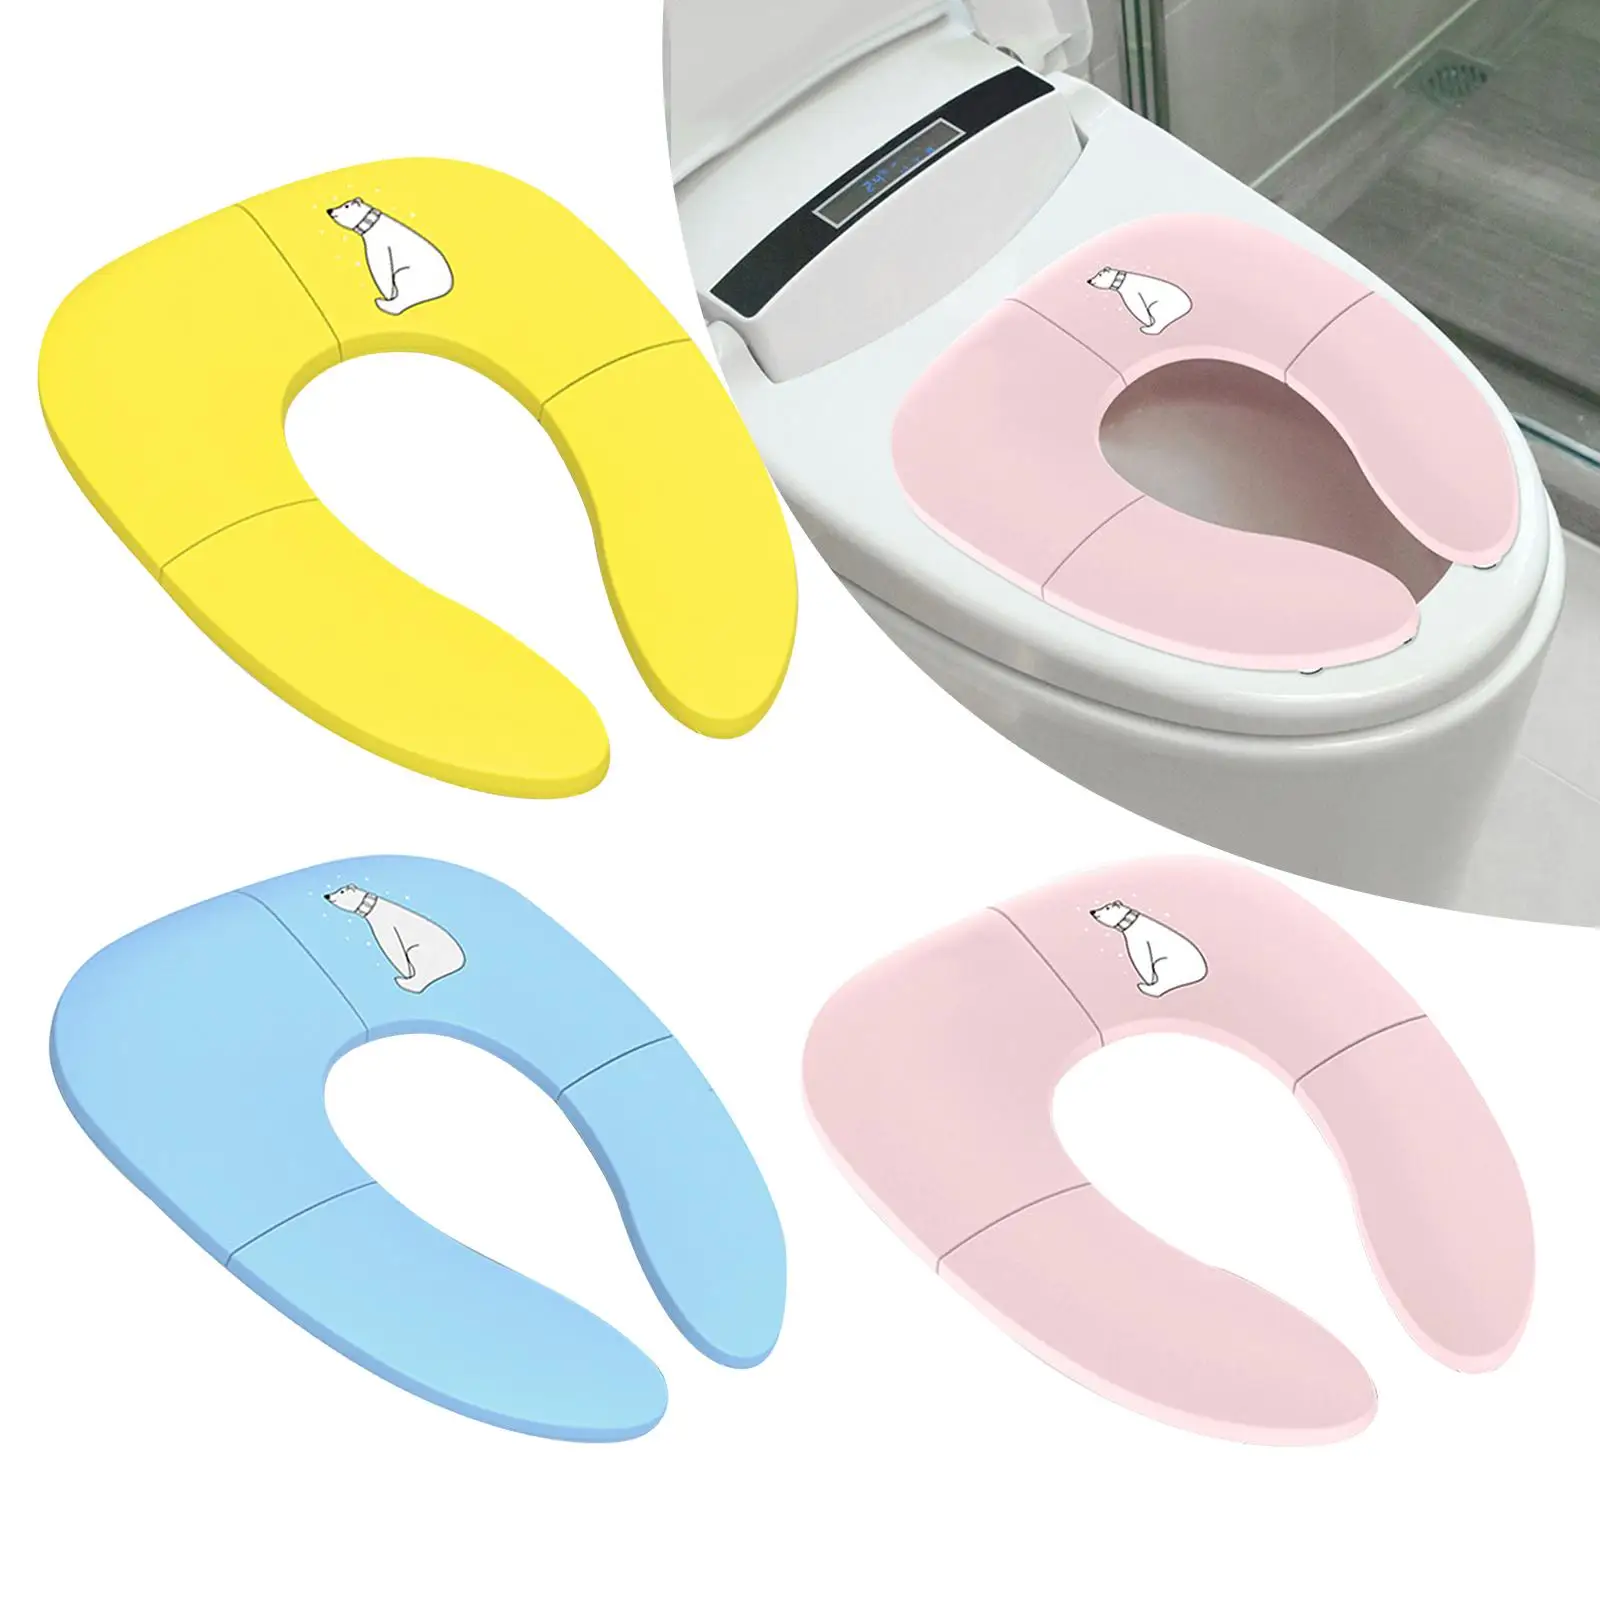 Folding Toilet pad Upgraded Non Slip Toilet Seat Toilet Ring for travel Use Round and Oval Toilets Toddler Girls